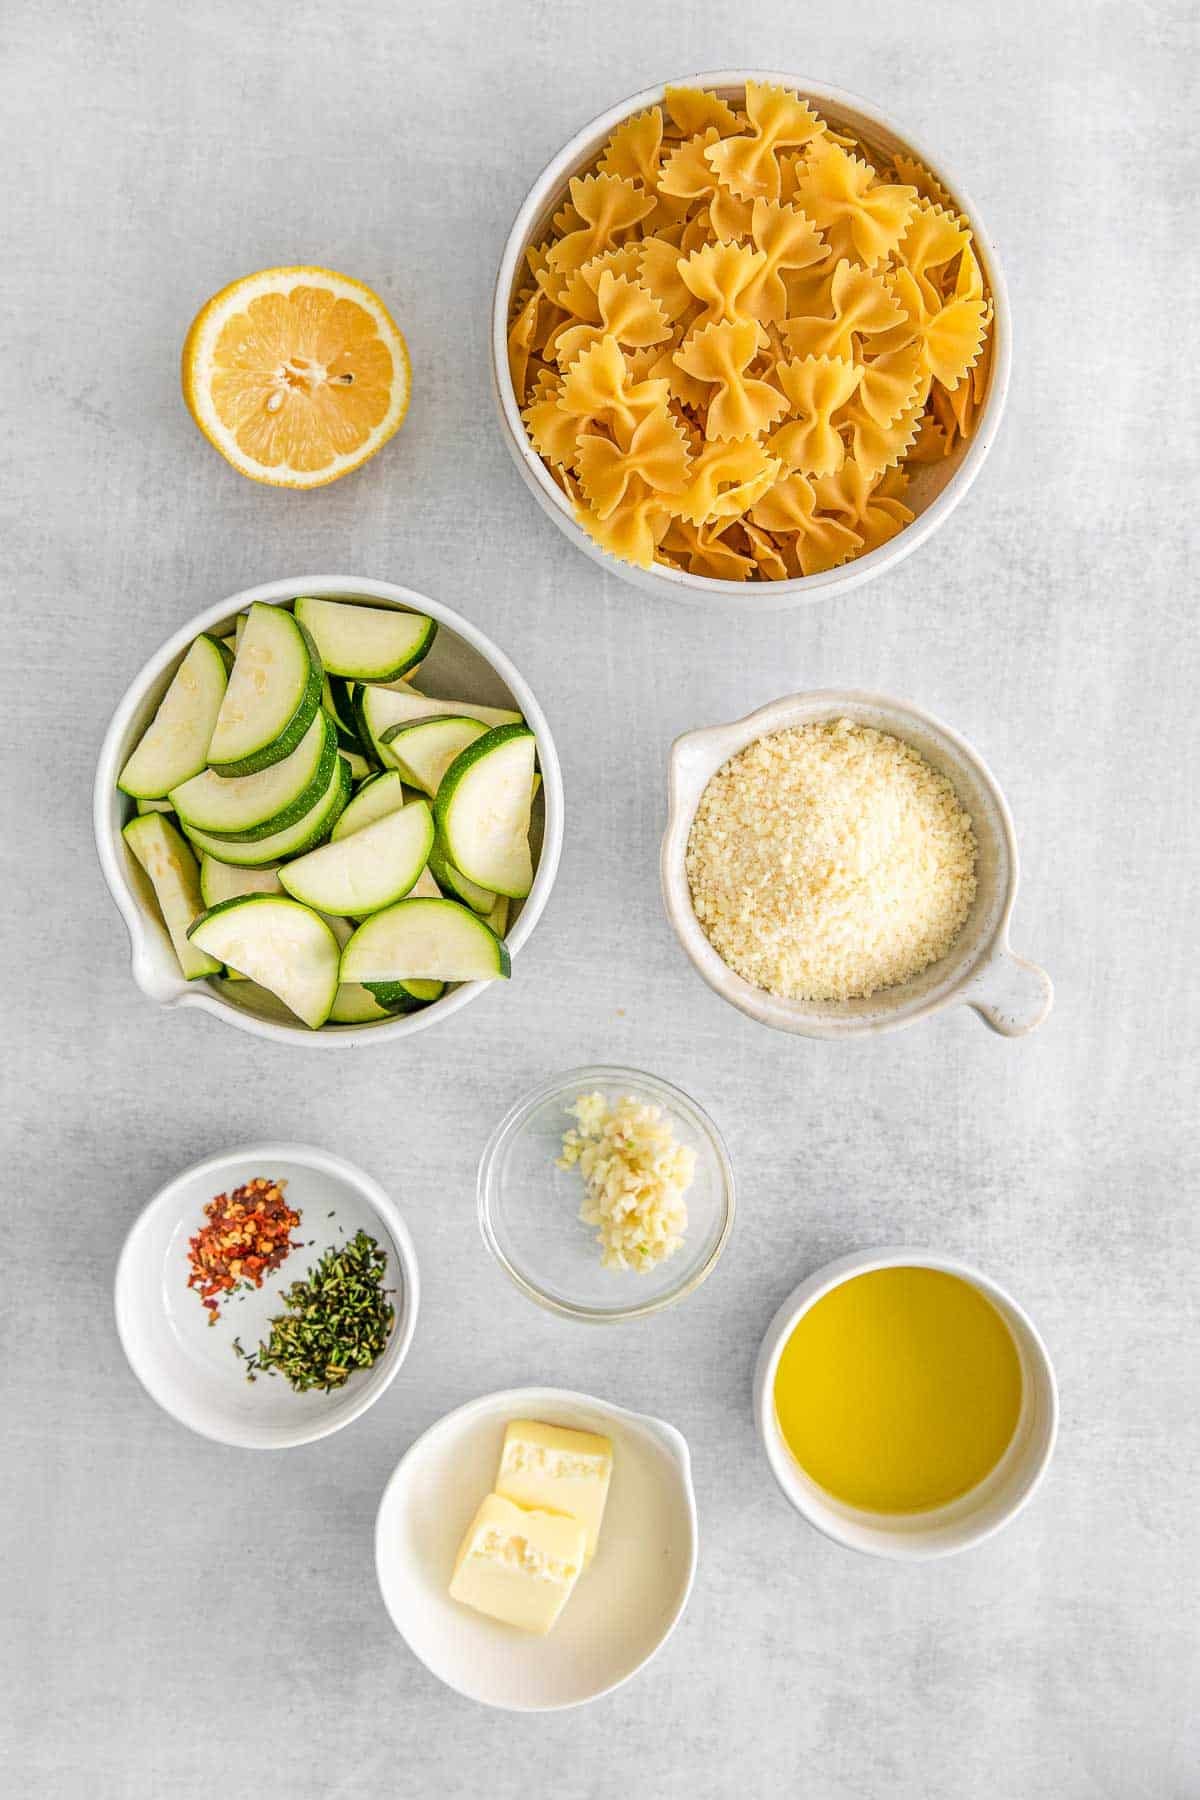 Several bowls of ingredients for lemon zucchini pasta - Bowtie pasta, olive oil, zucchini, garlic, thyme, crushed red pepper, butter, lemon, parmesan cheese, fresh parsley and toasted pine nuts.